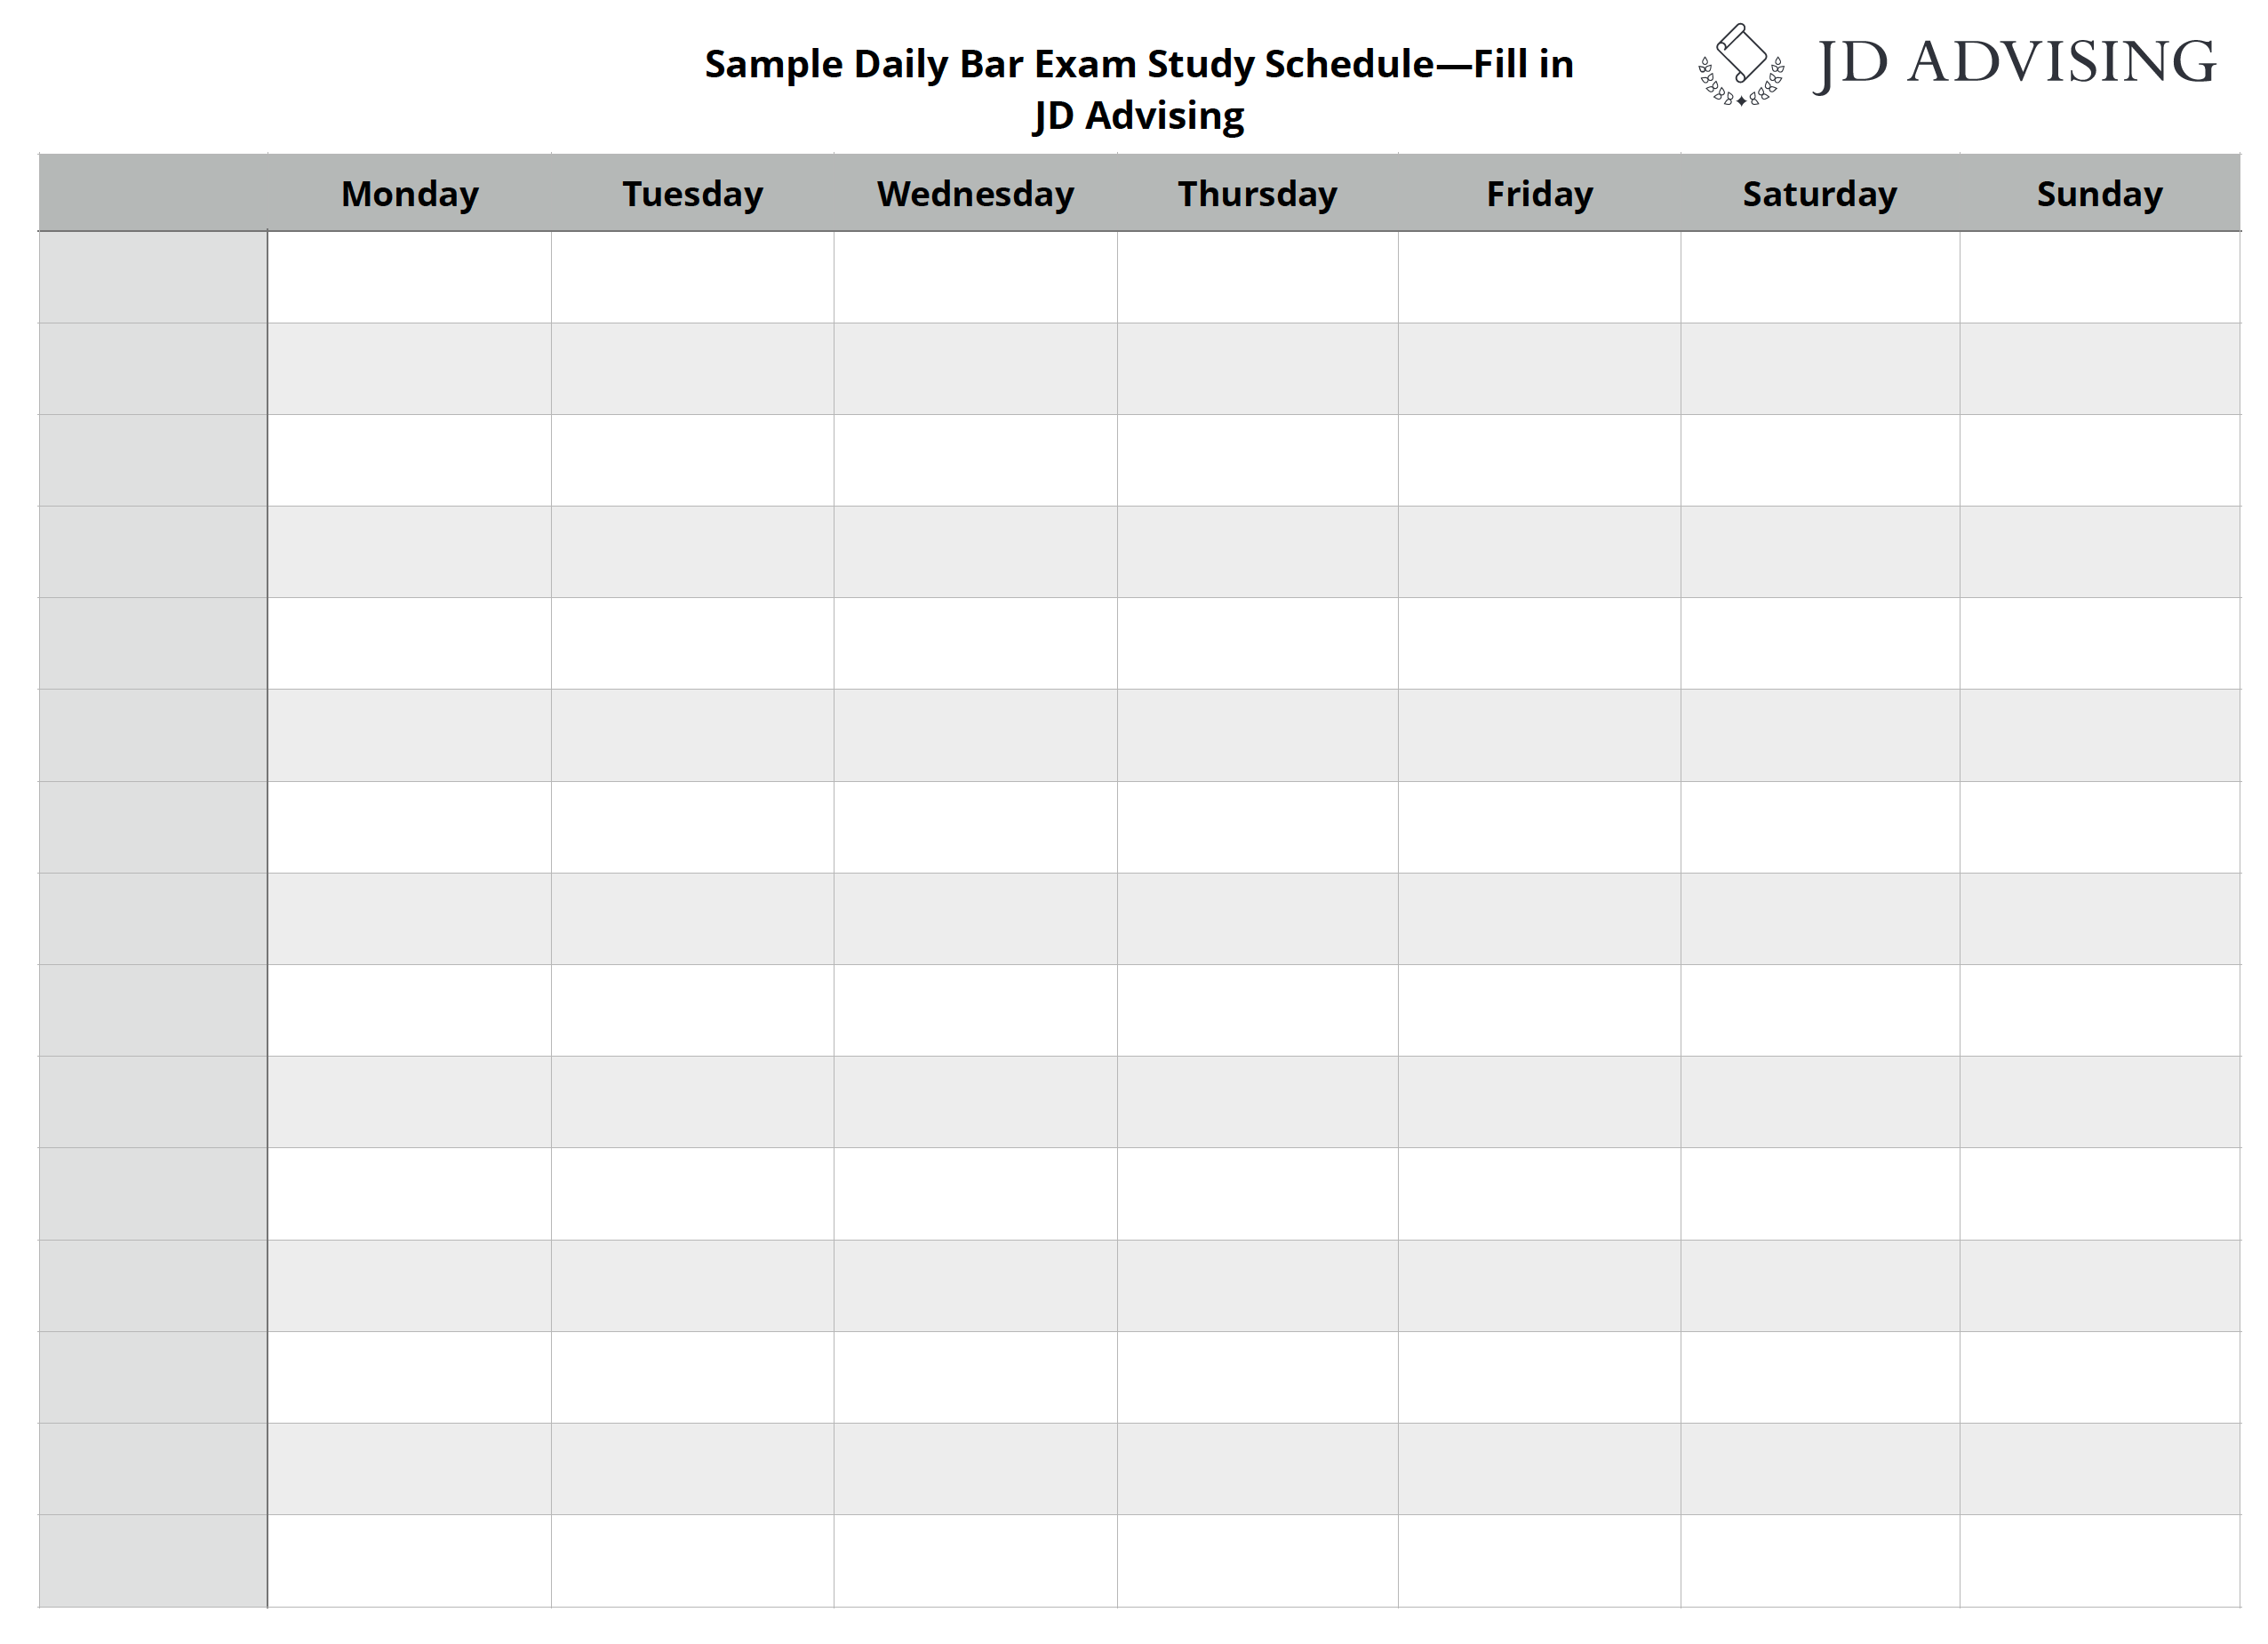 How To Create A Daily Bar Exam Study Schedule JD Advising, LLC.